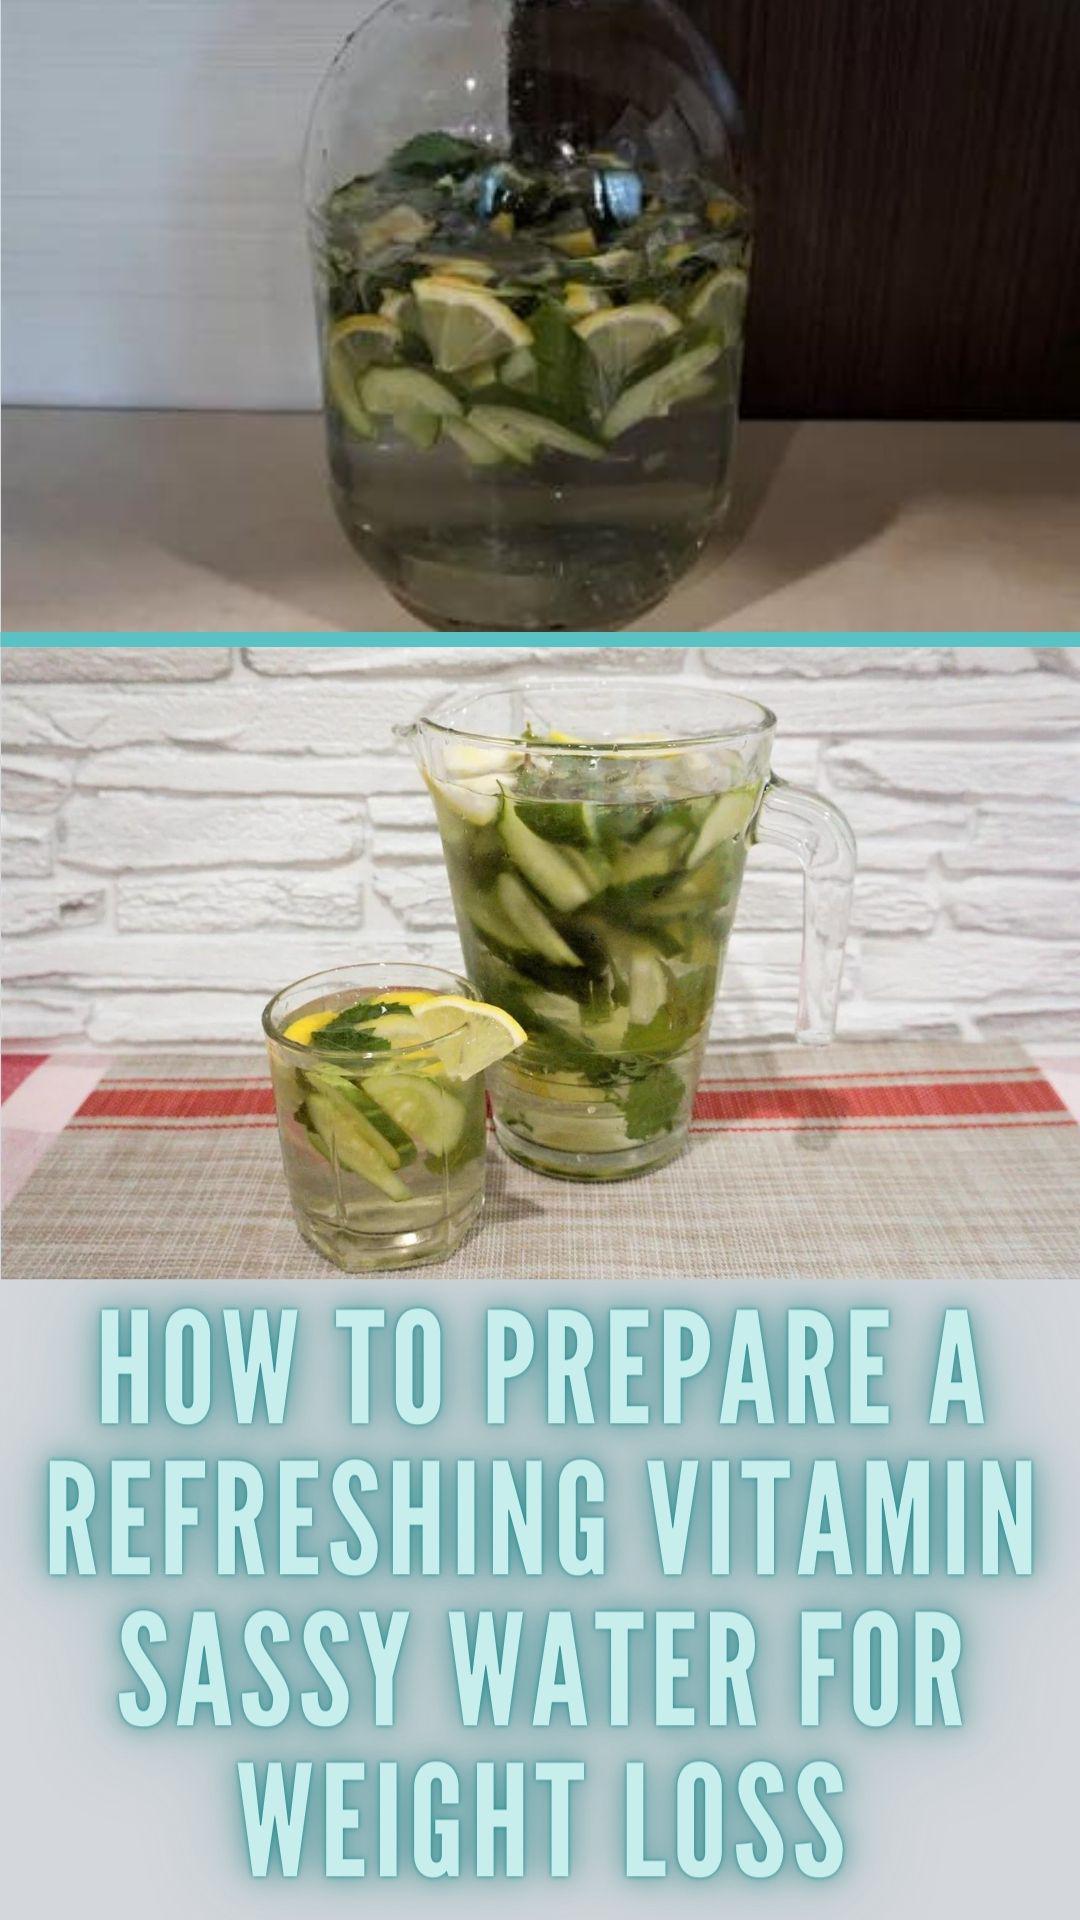 How to Prepare a Refreshing Vitamin Sassy Water for Weight Loss